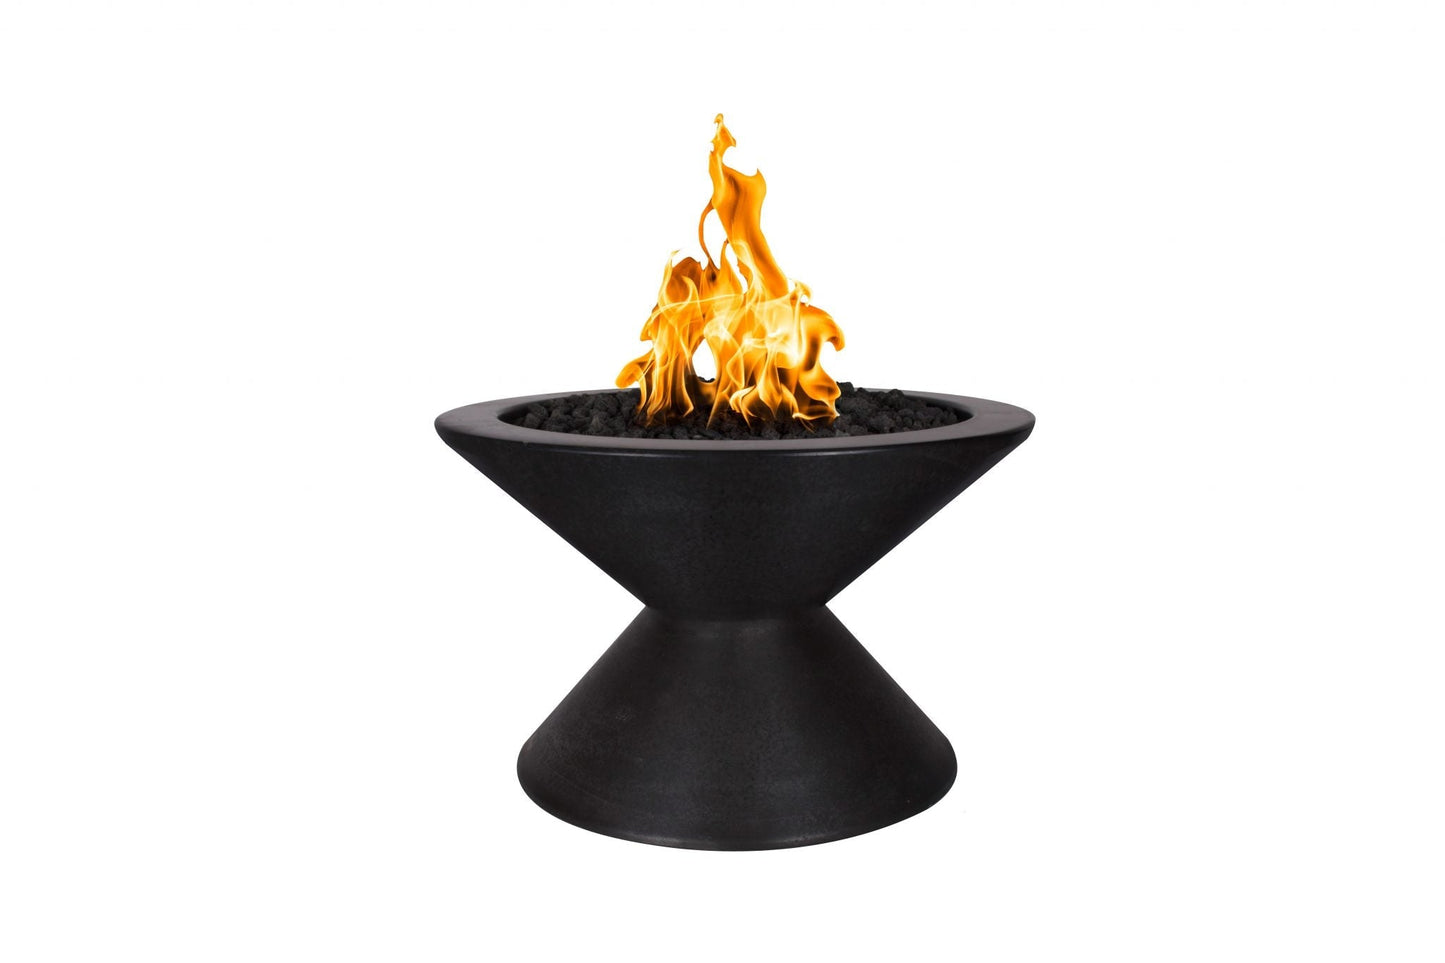 The Outdoor Plus Round Lucia 31" Metallic Copper GFRC Concrete Natural Gas Fire Pit with Match Lit Ignition